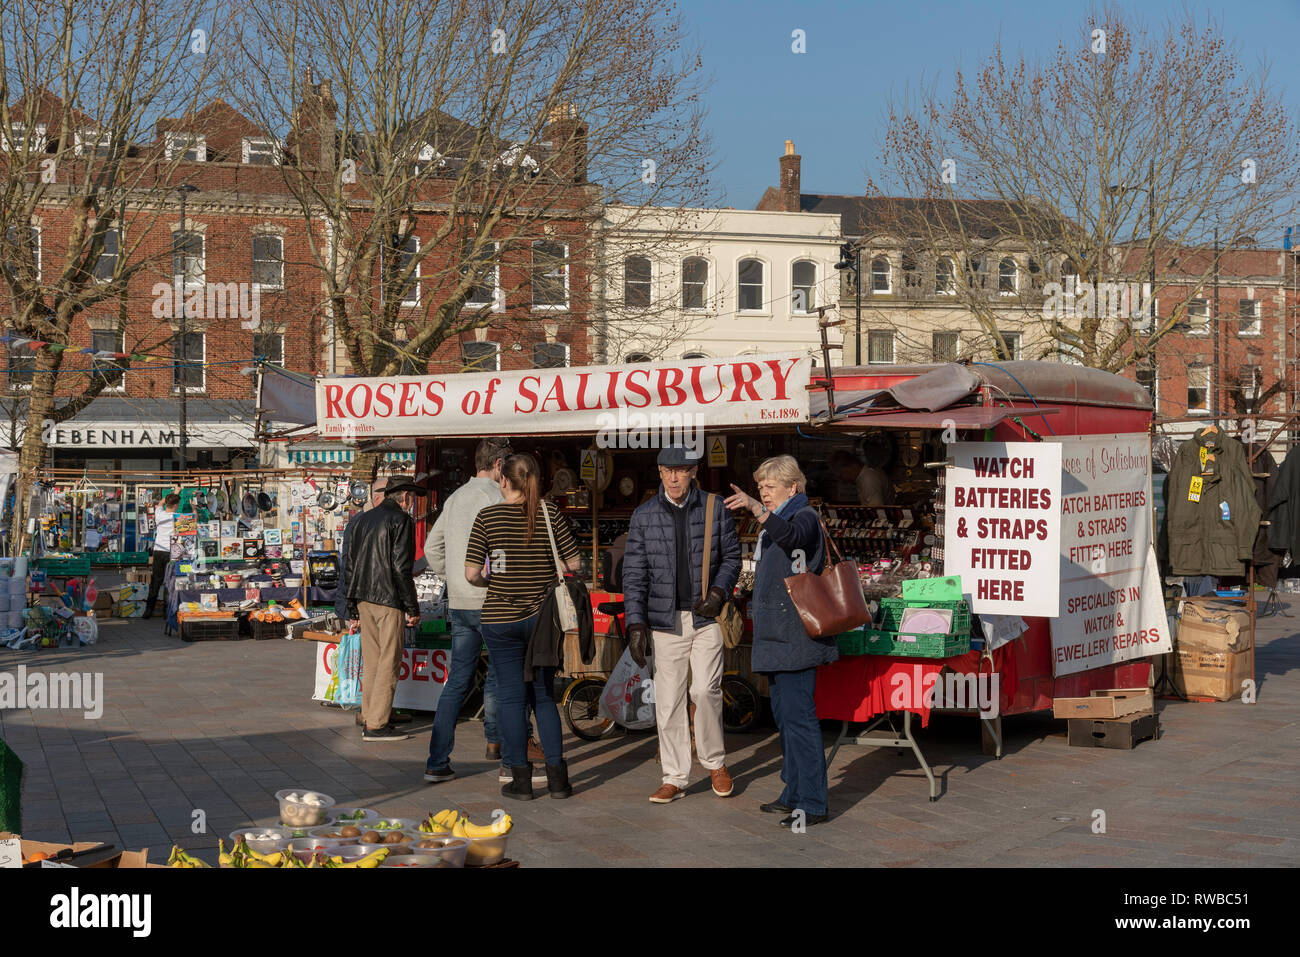 Salisbury, Wiltshire, England, UK. March 2019.  Stalls and customers on market day on the Market Place in the city centre Stock Photo